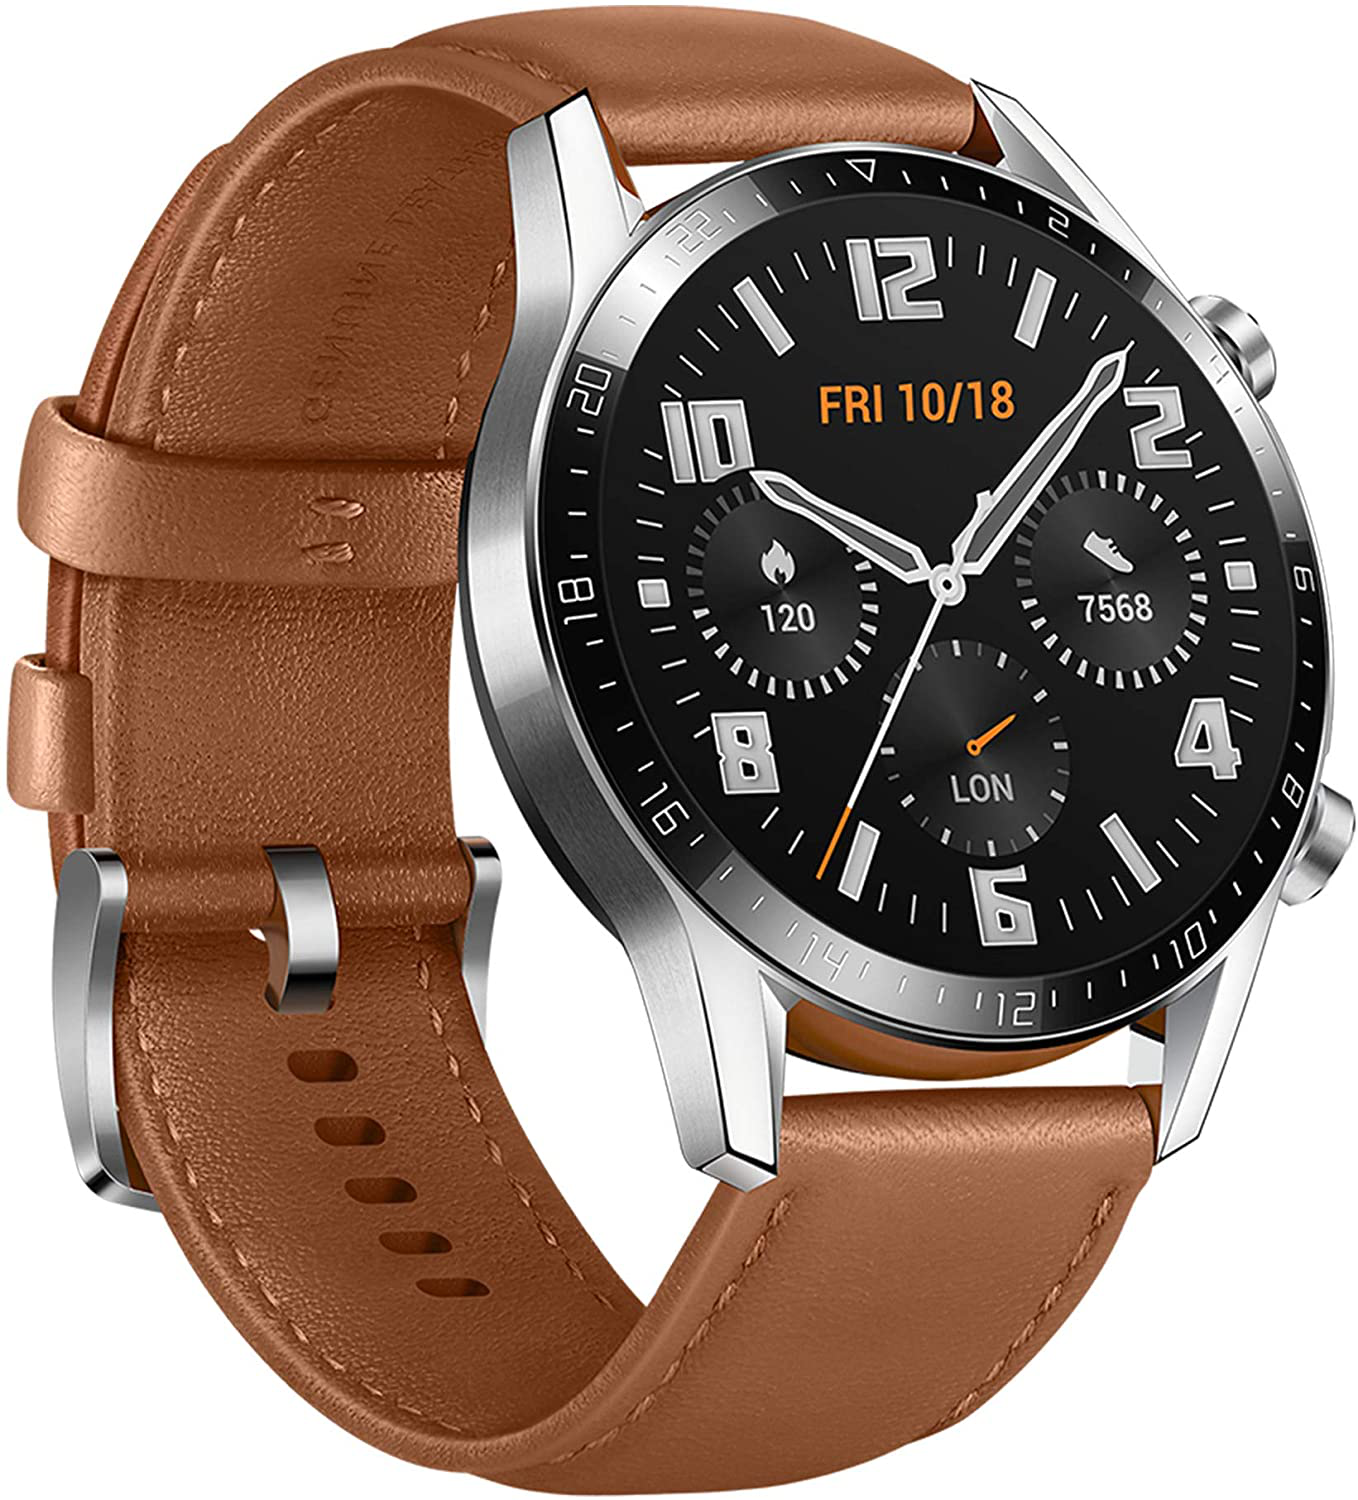 HUAWEI Watch GT 2 2019 Bluetooth SmartWatch, Longer Lasting 2 Weeks Battery Life, Waterproof, Compatible with iPhone and Android, 46mm No Warranty International Version (Pebble Brown)